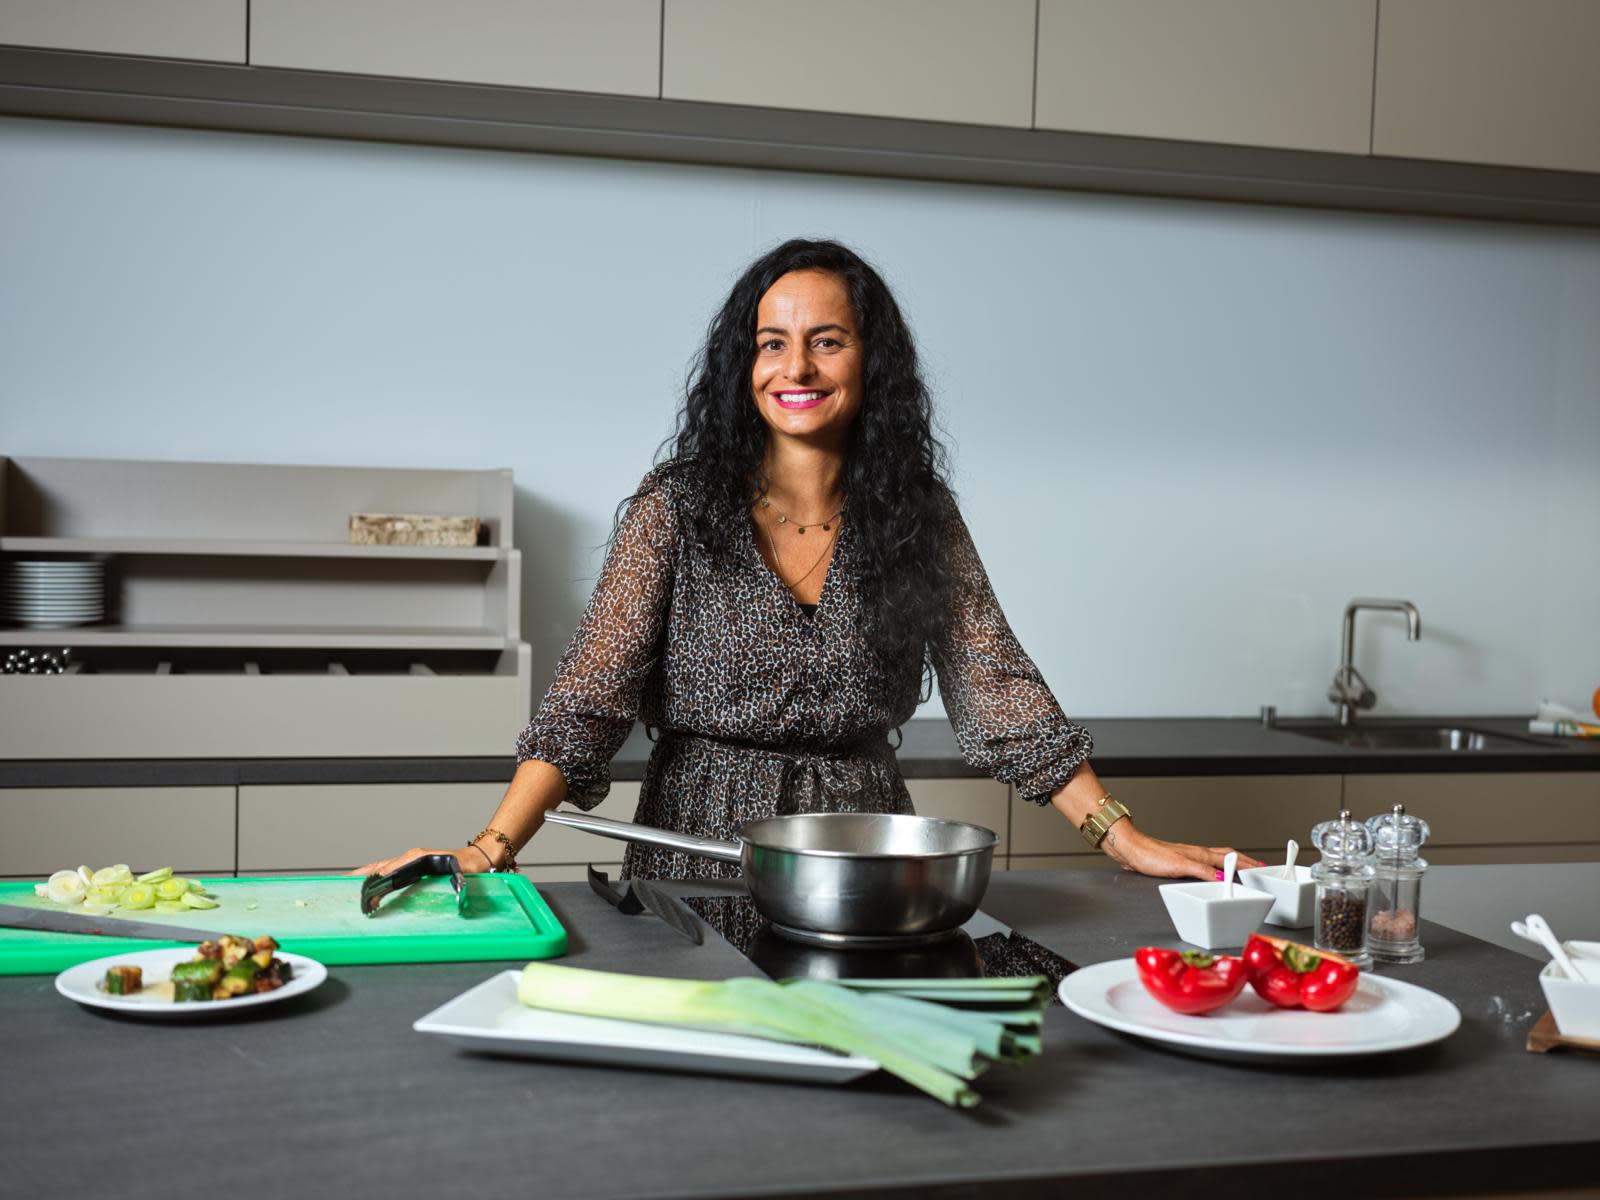 Nancy Da Silva stands in a kitchen, a pan and vegetables in front of her.